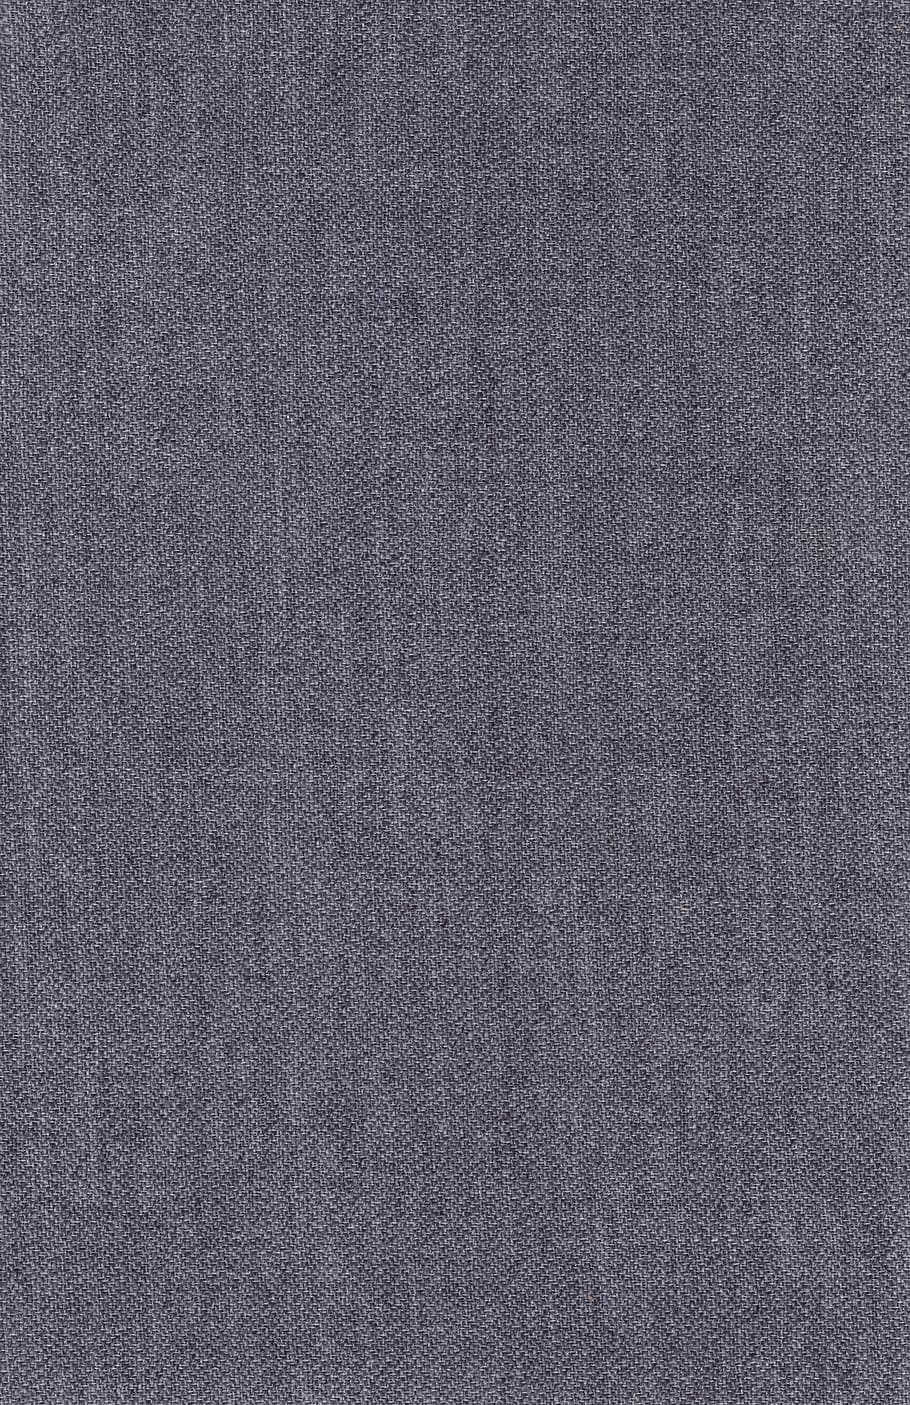 closeup photo of gray textile, textures, background, fabric, raw